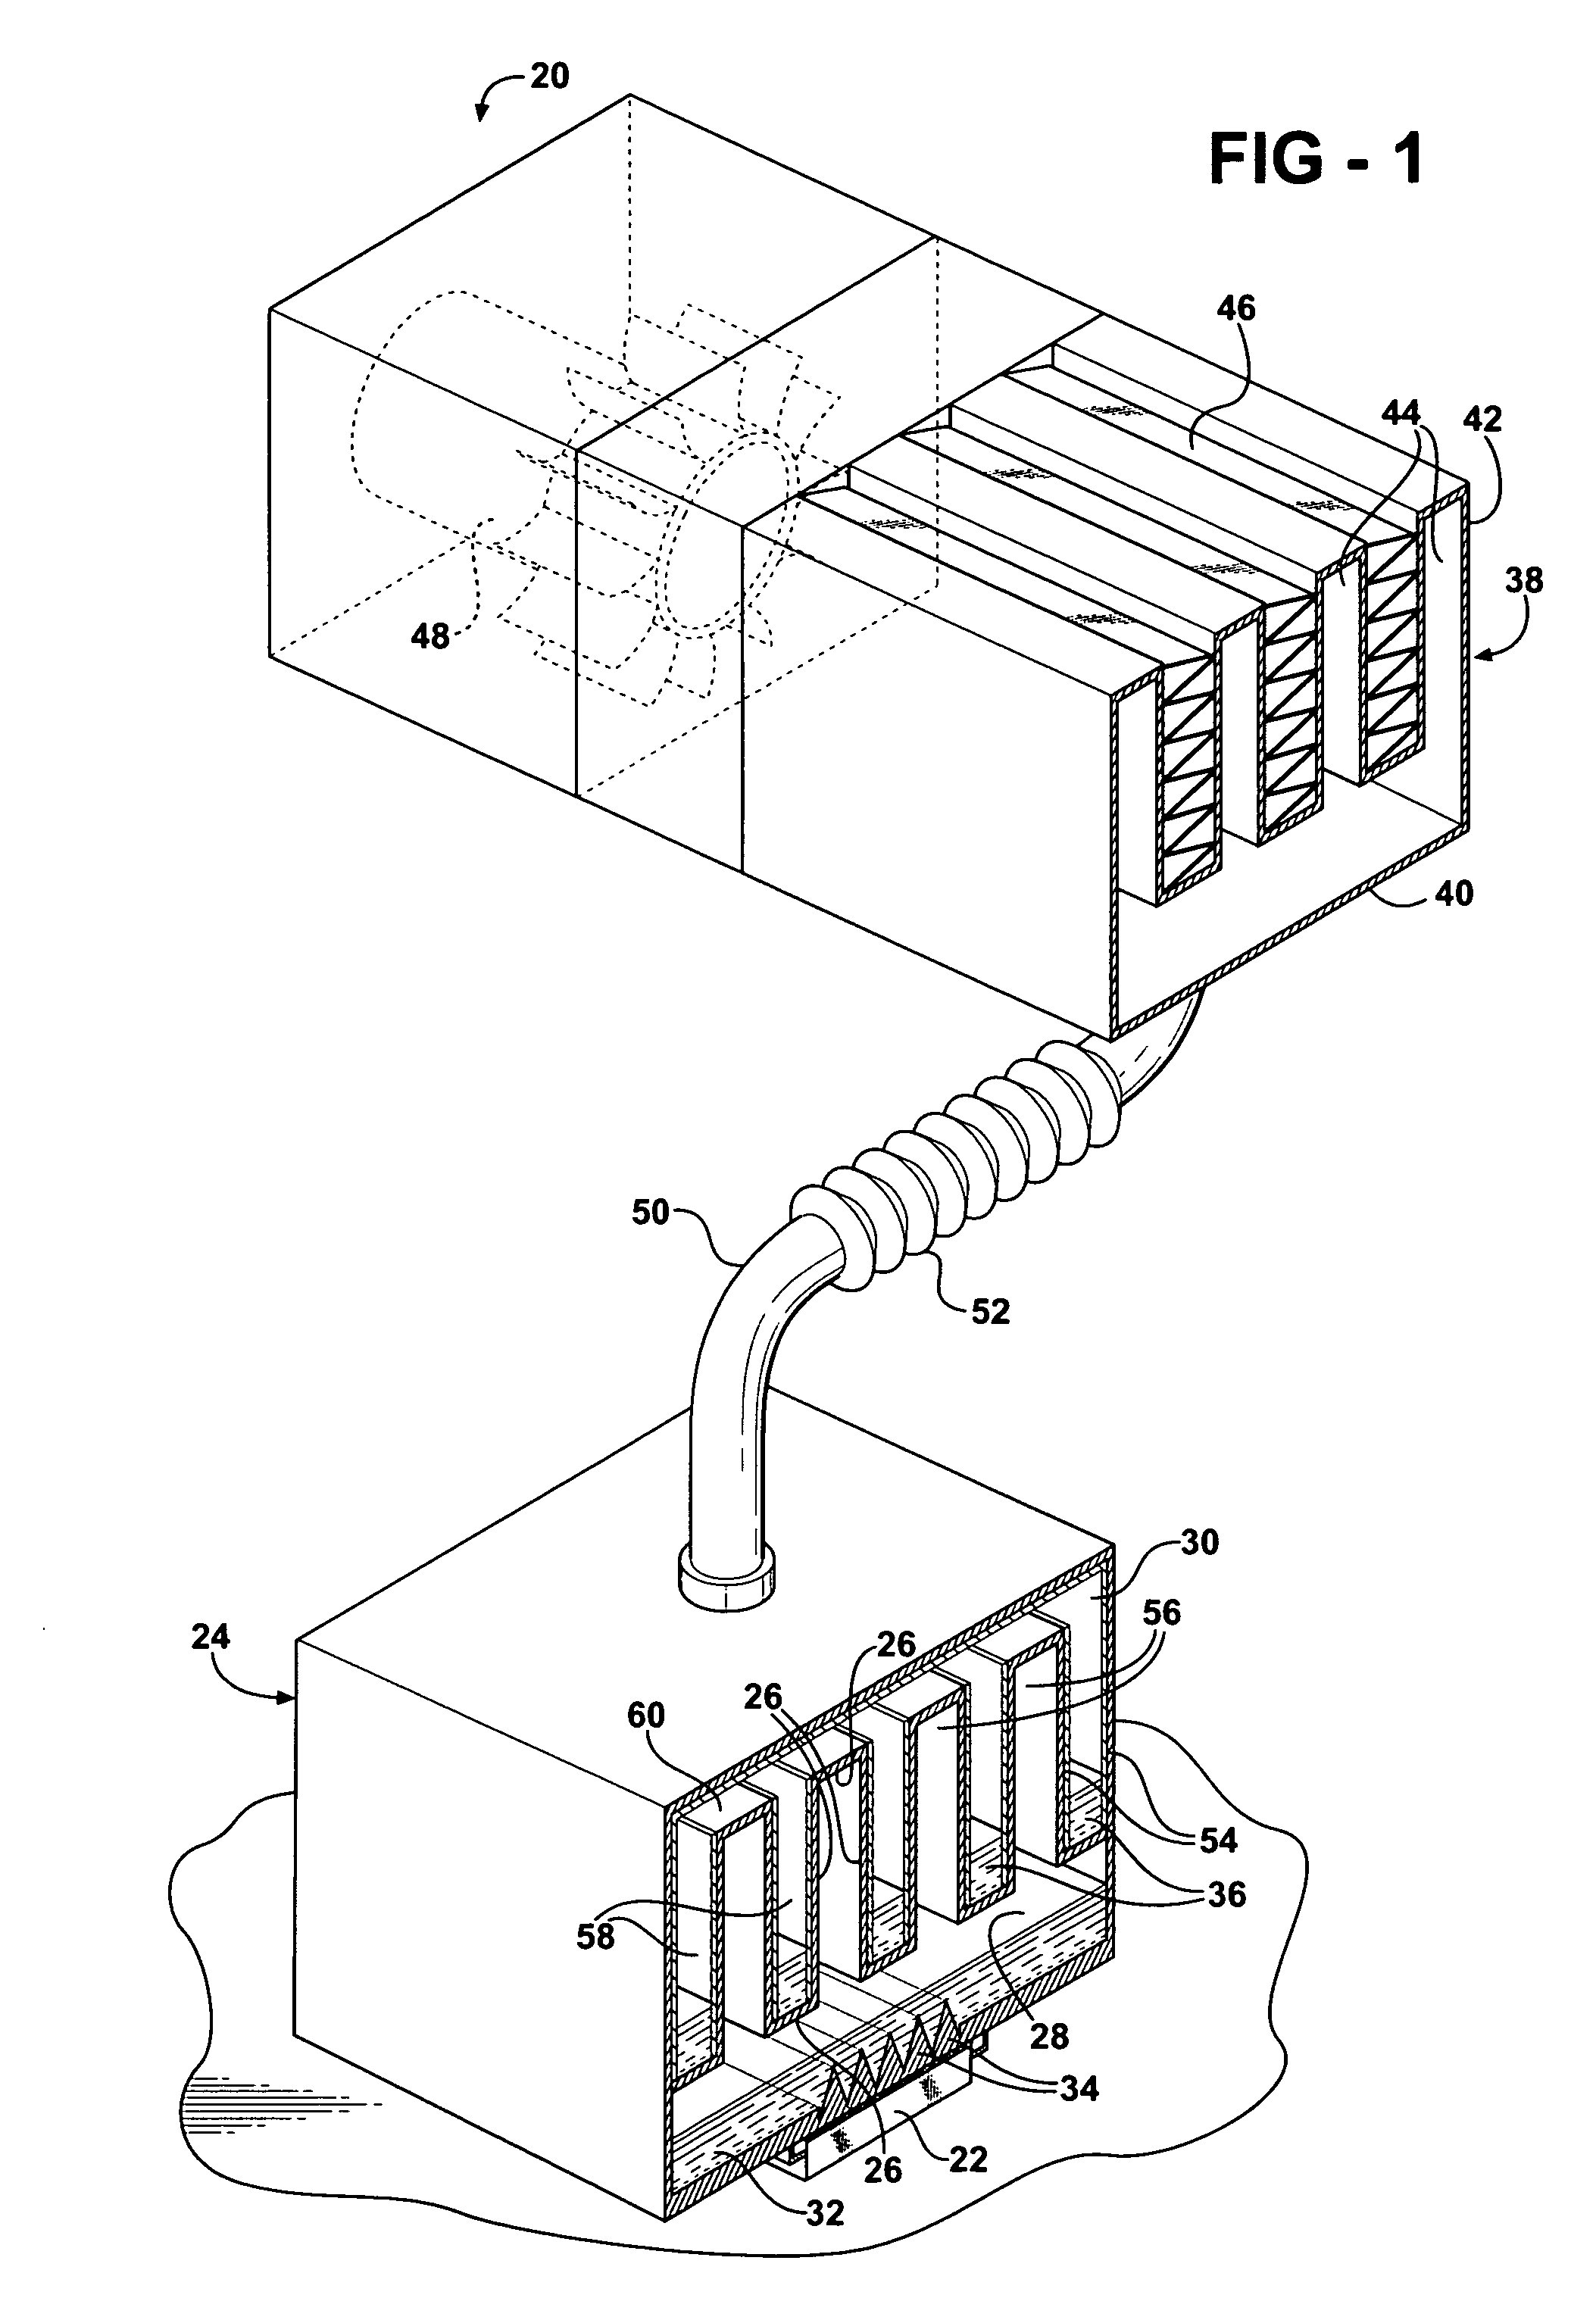 Evaporatively cooled thermosiphon